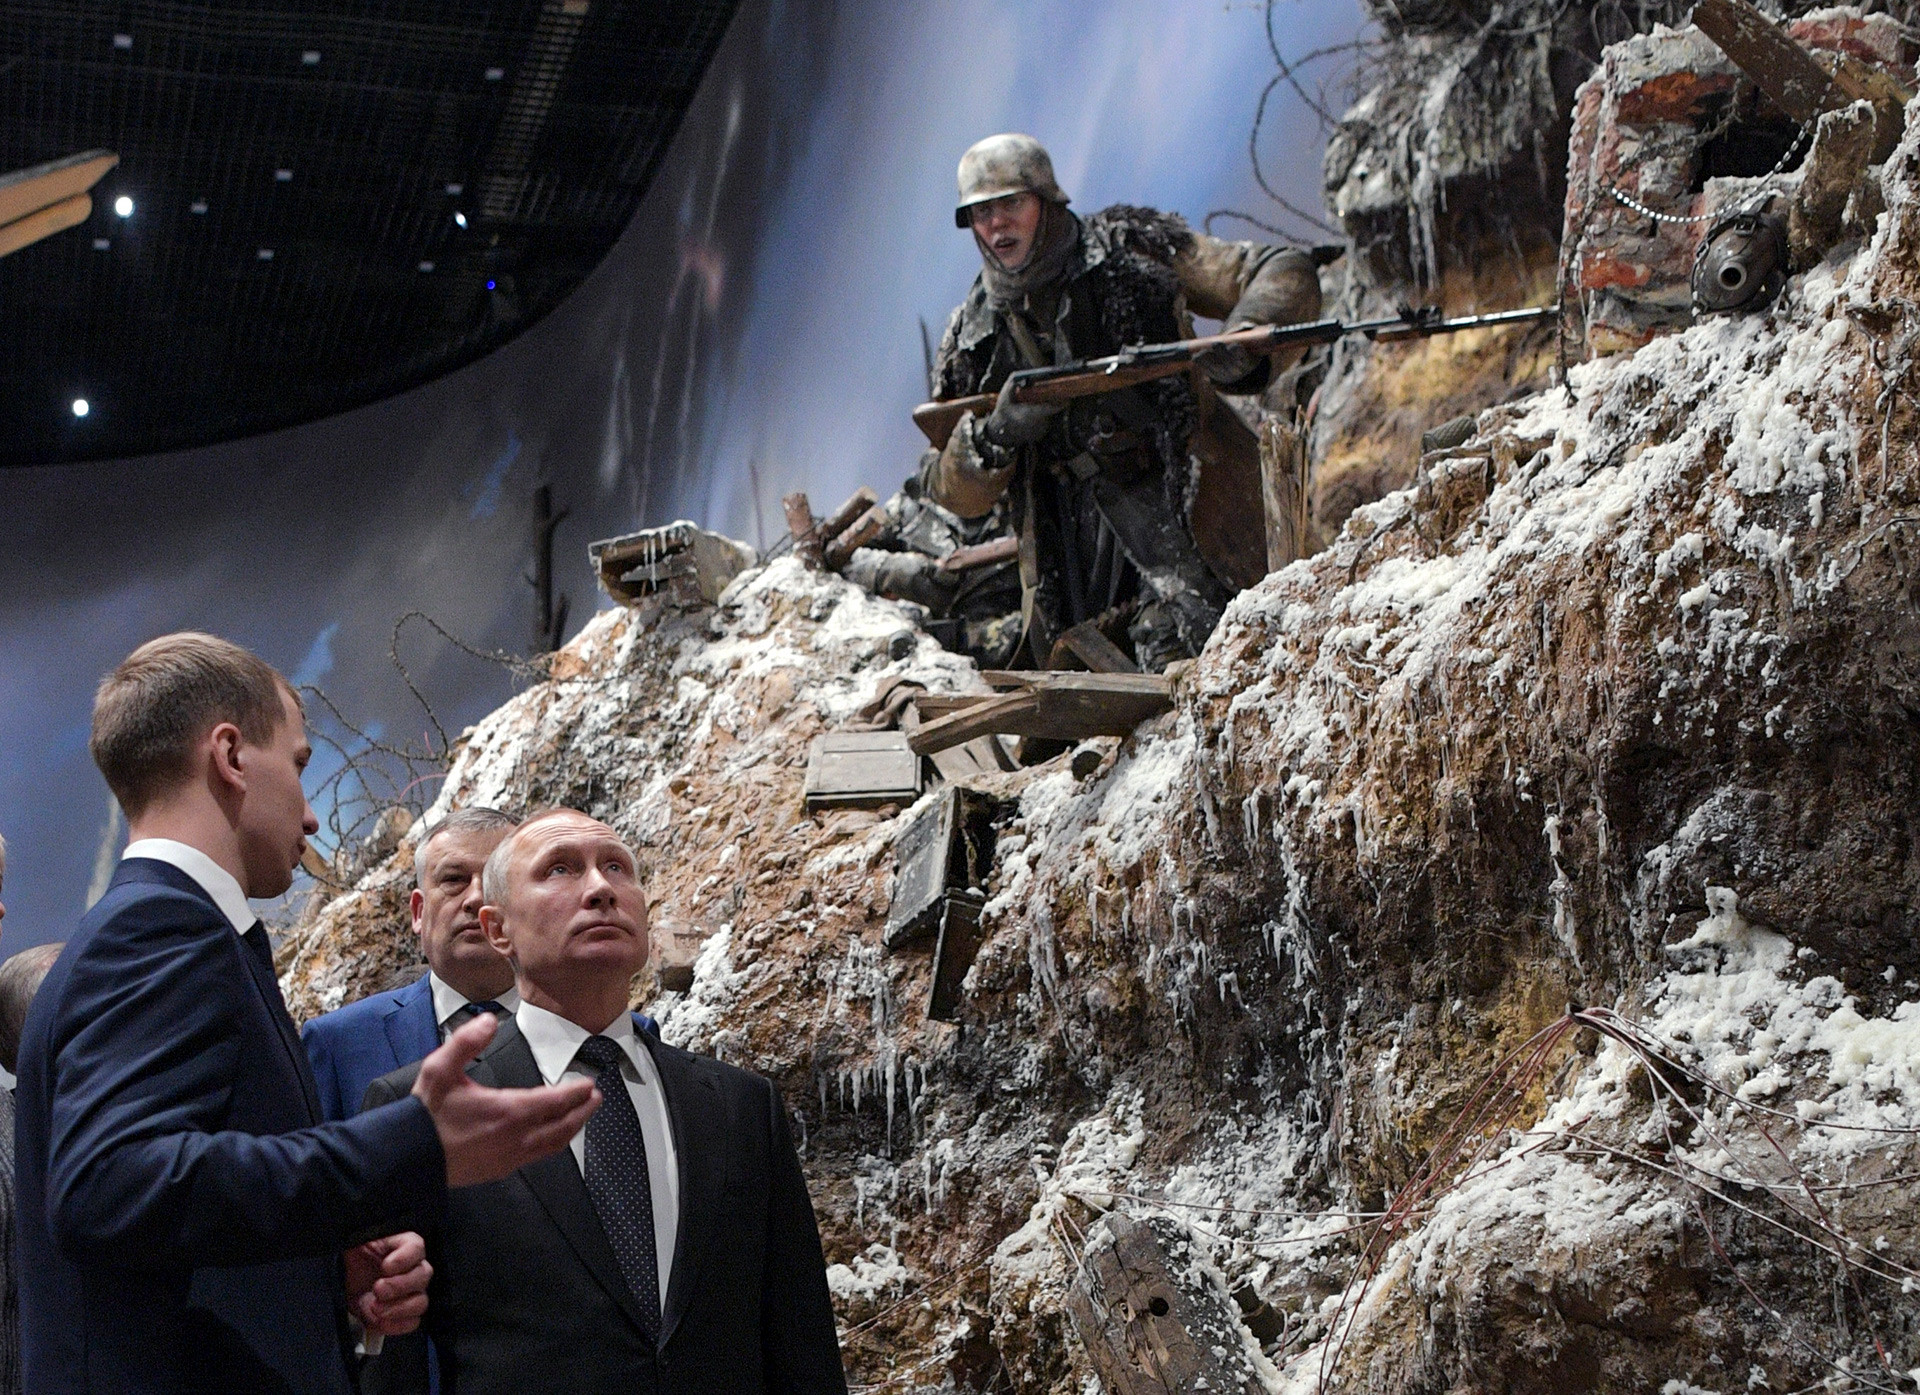 It was Vladimir Putin who suggested creating a permanent 3D panorama instead of temporary installations devoted to the conflict